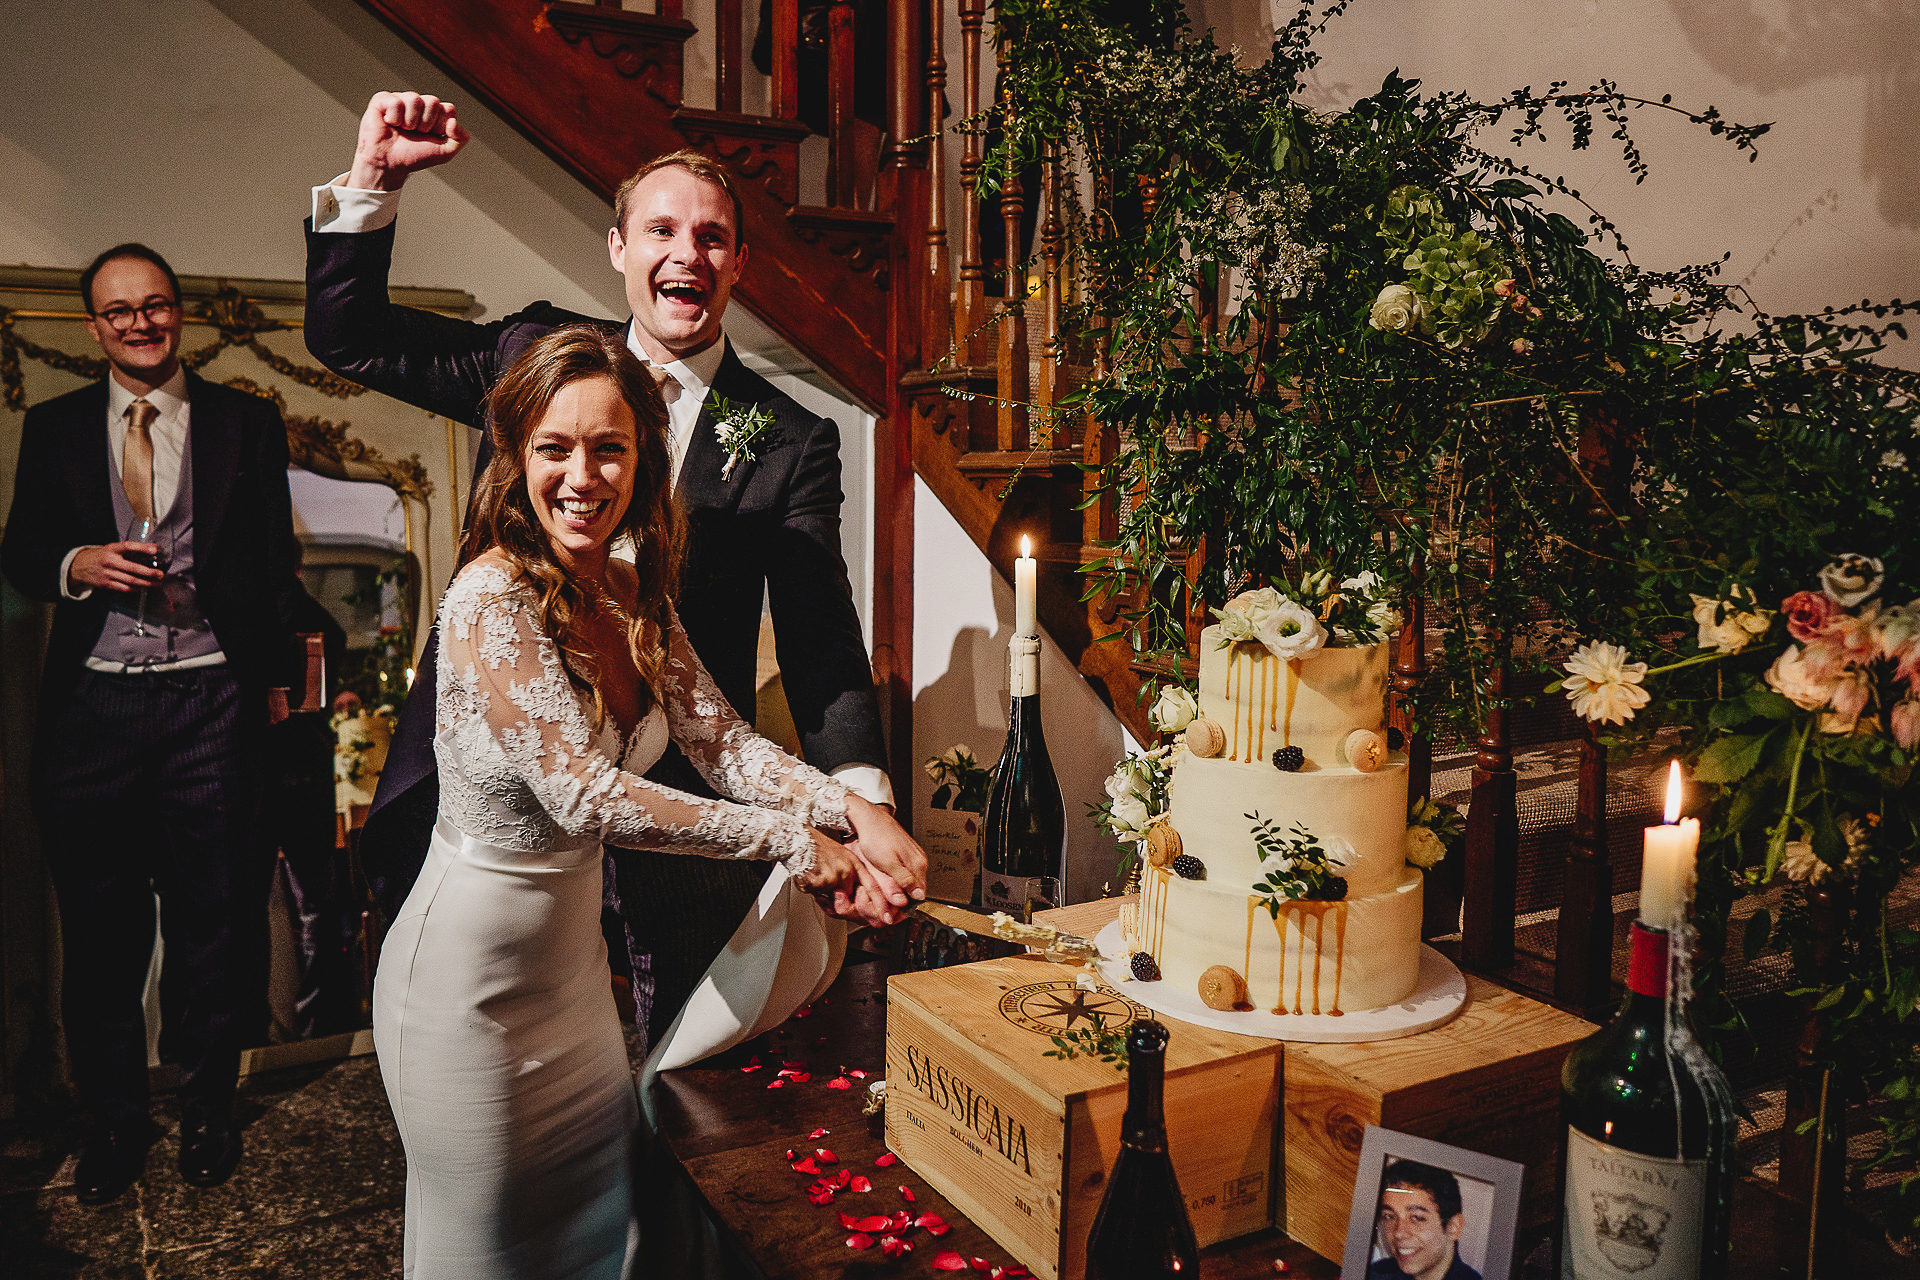 Bride and groom cheering and smiling while cutting cake